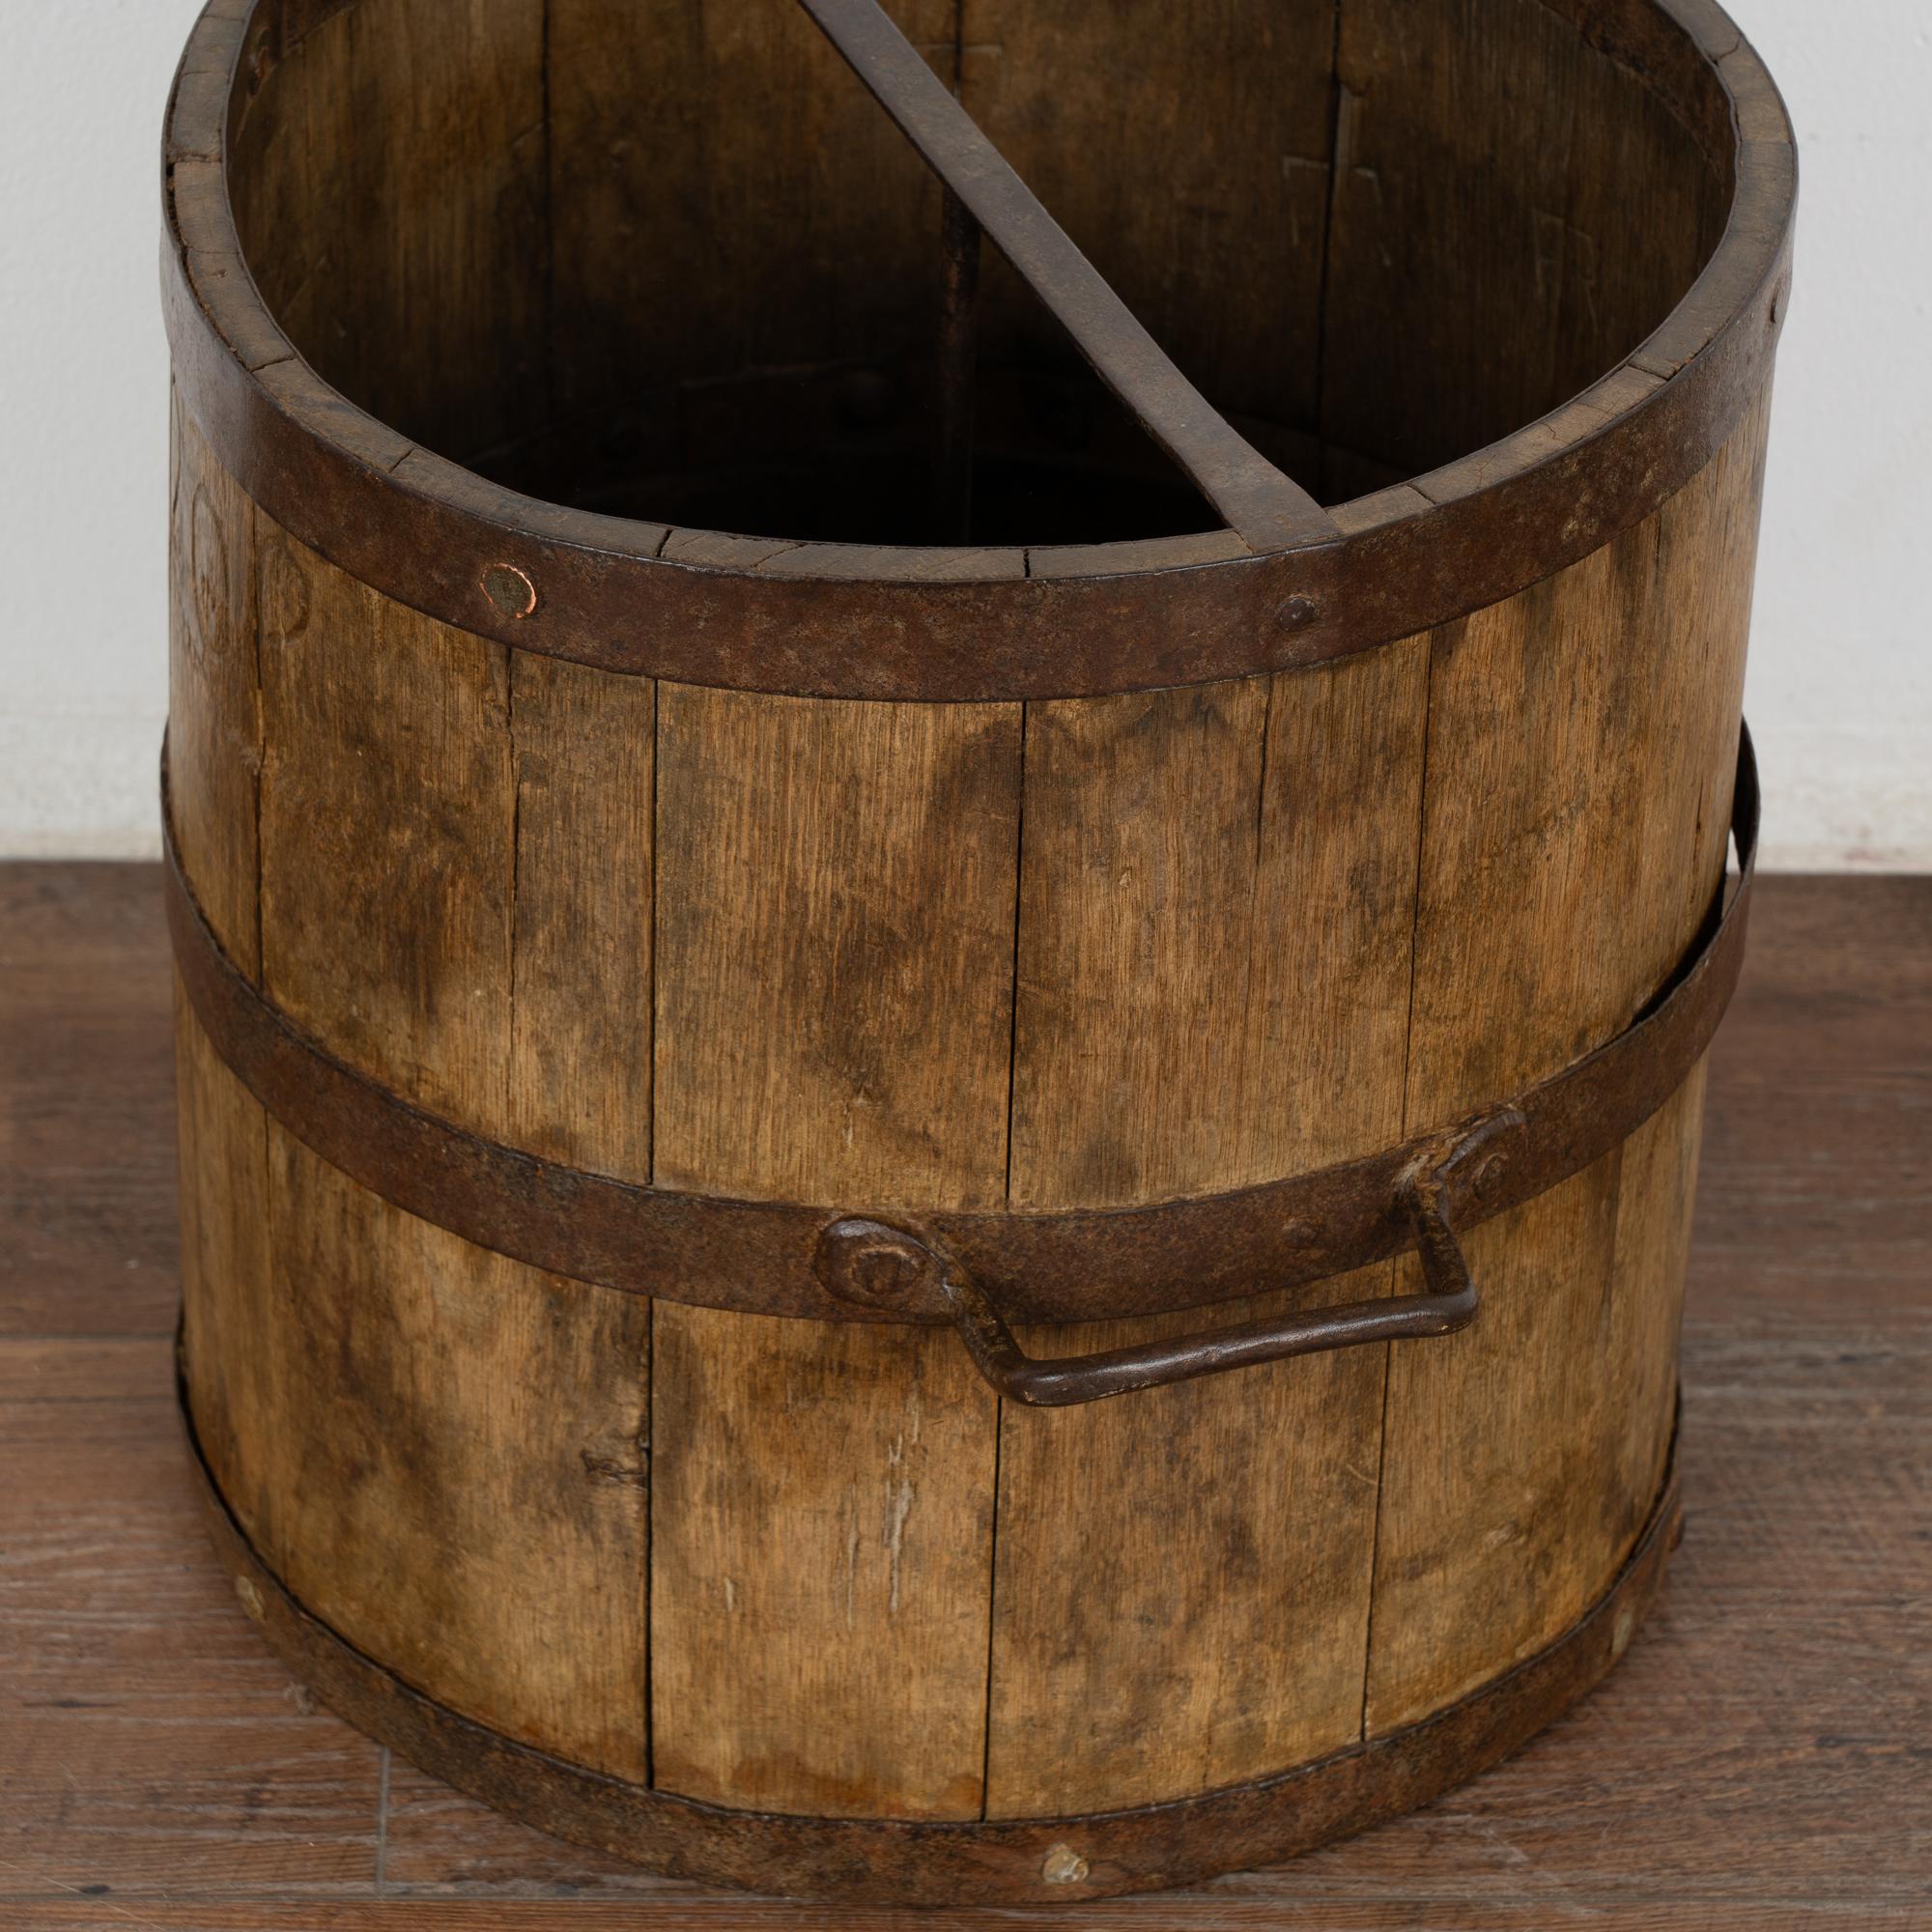 Oak Measuring Bucket with Metal Bands and Handles, Hungary circa 1920 In Good Condition For Sale In Round Top, TX